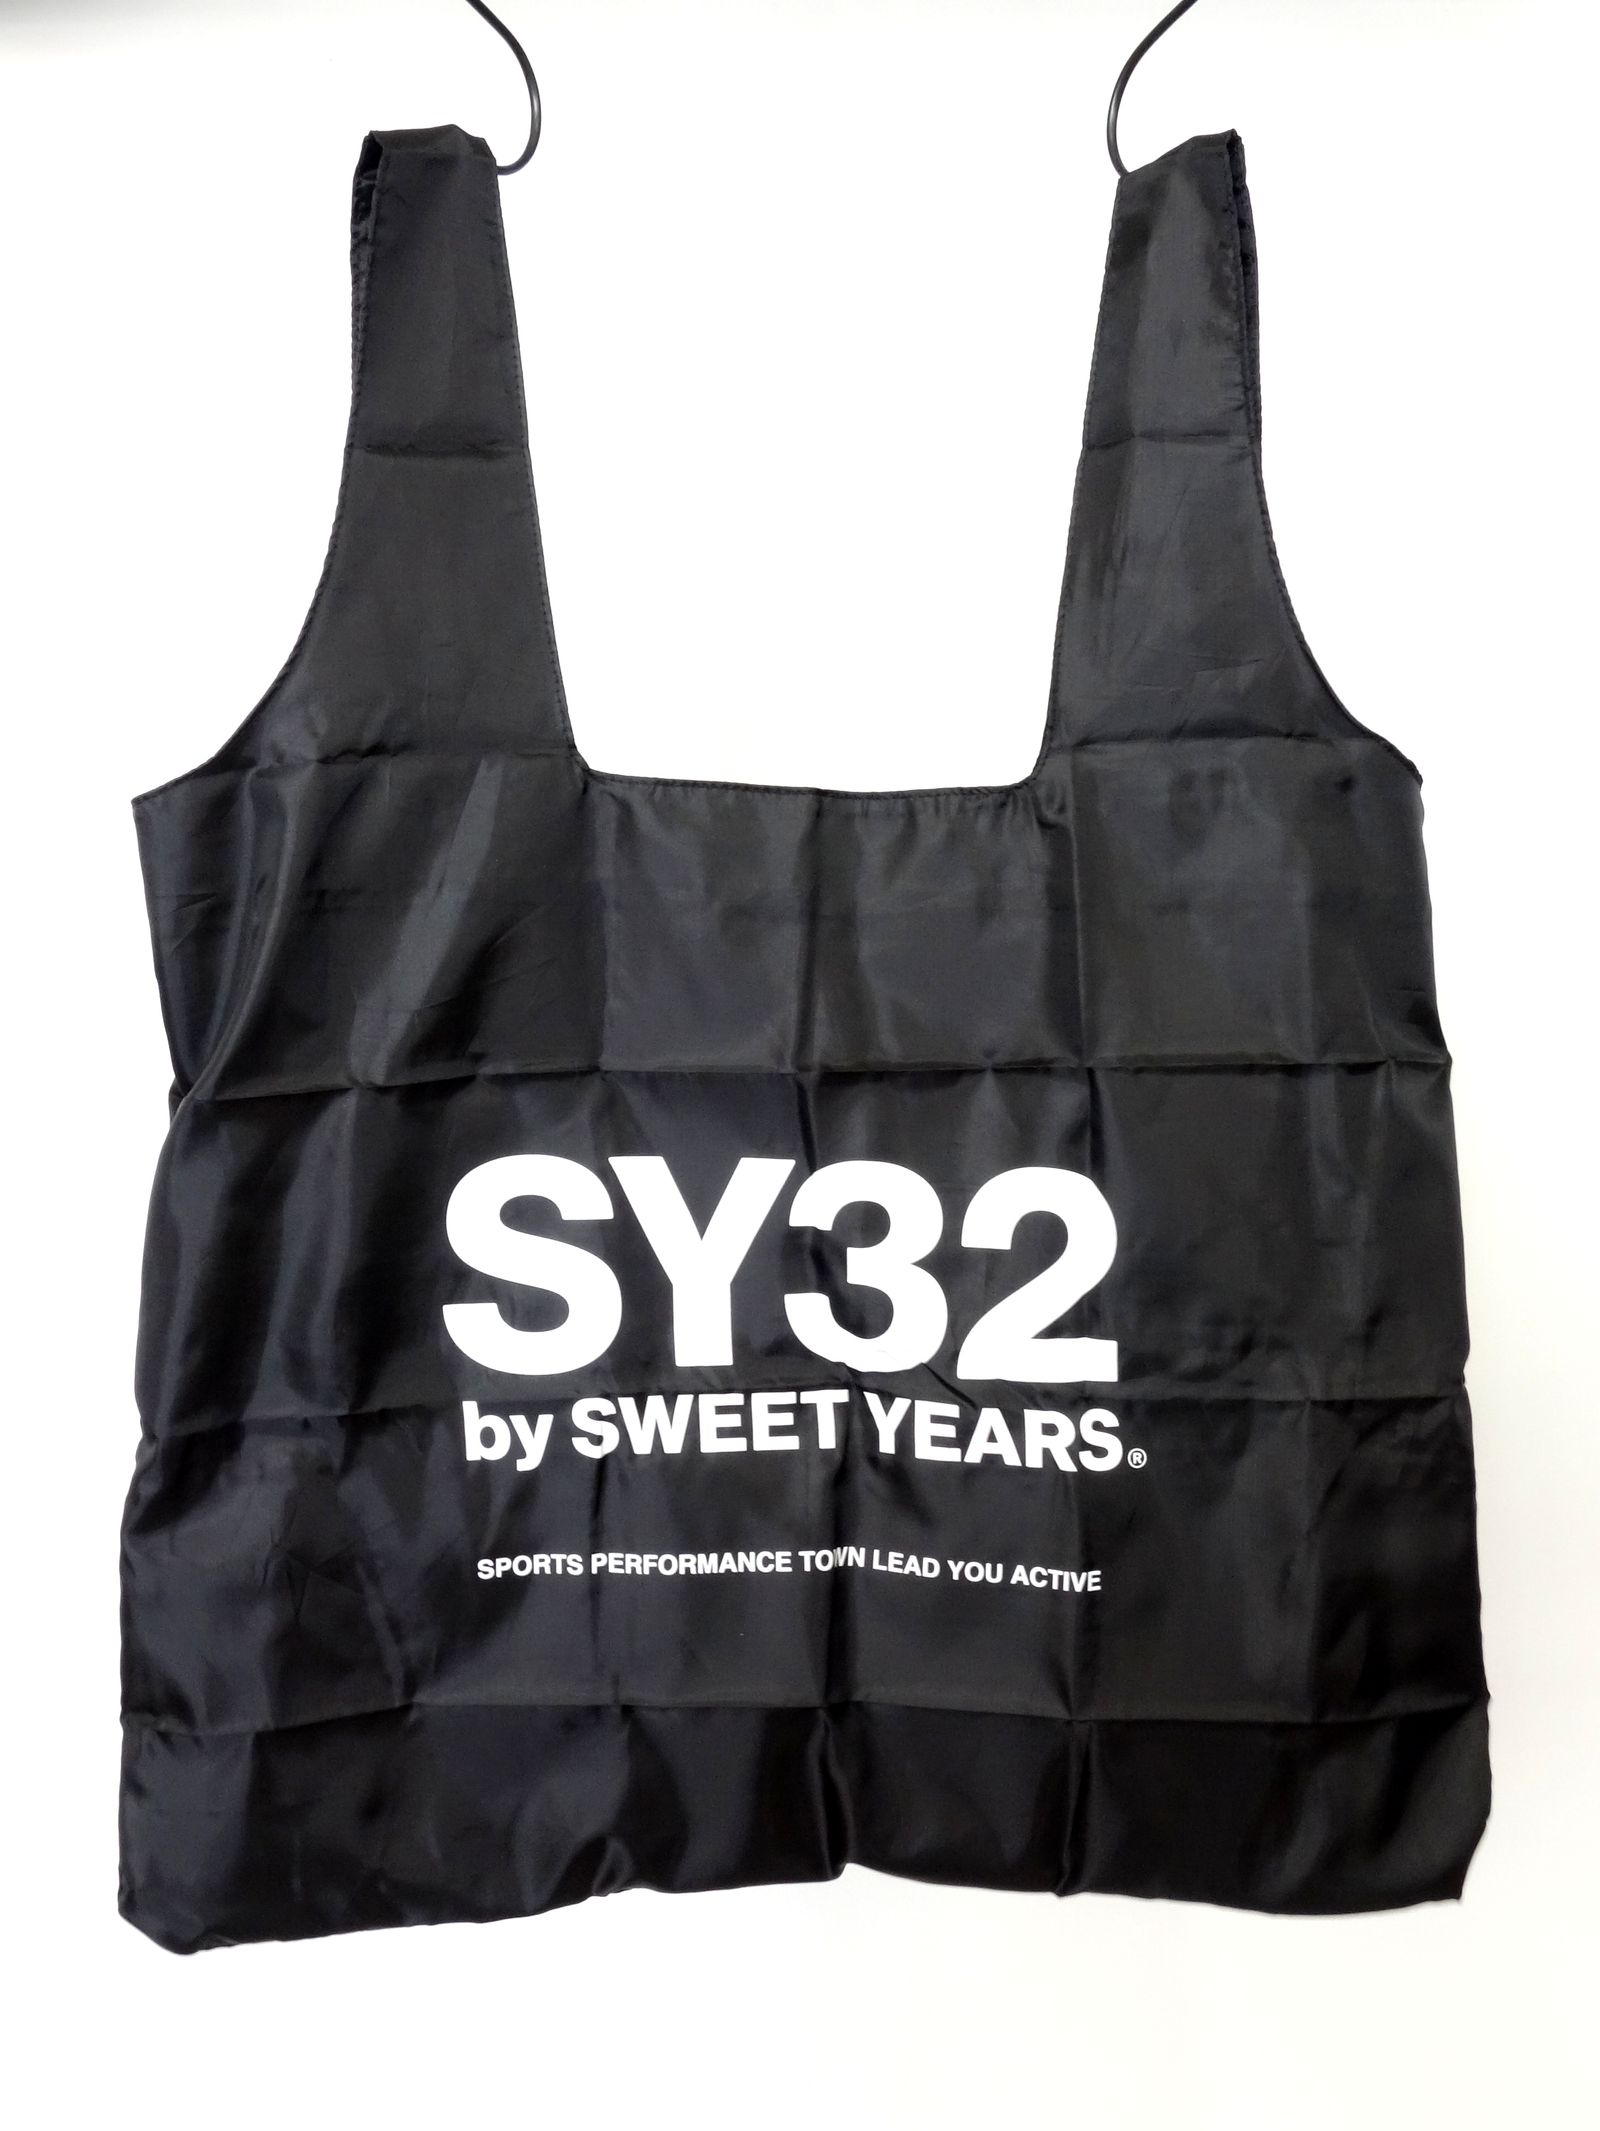 SY32 by SWEET YEARS - SY32 ECO TOTE BAG / 10571 / エコトートバッグ